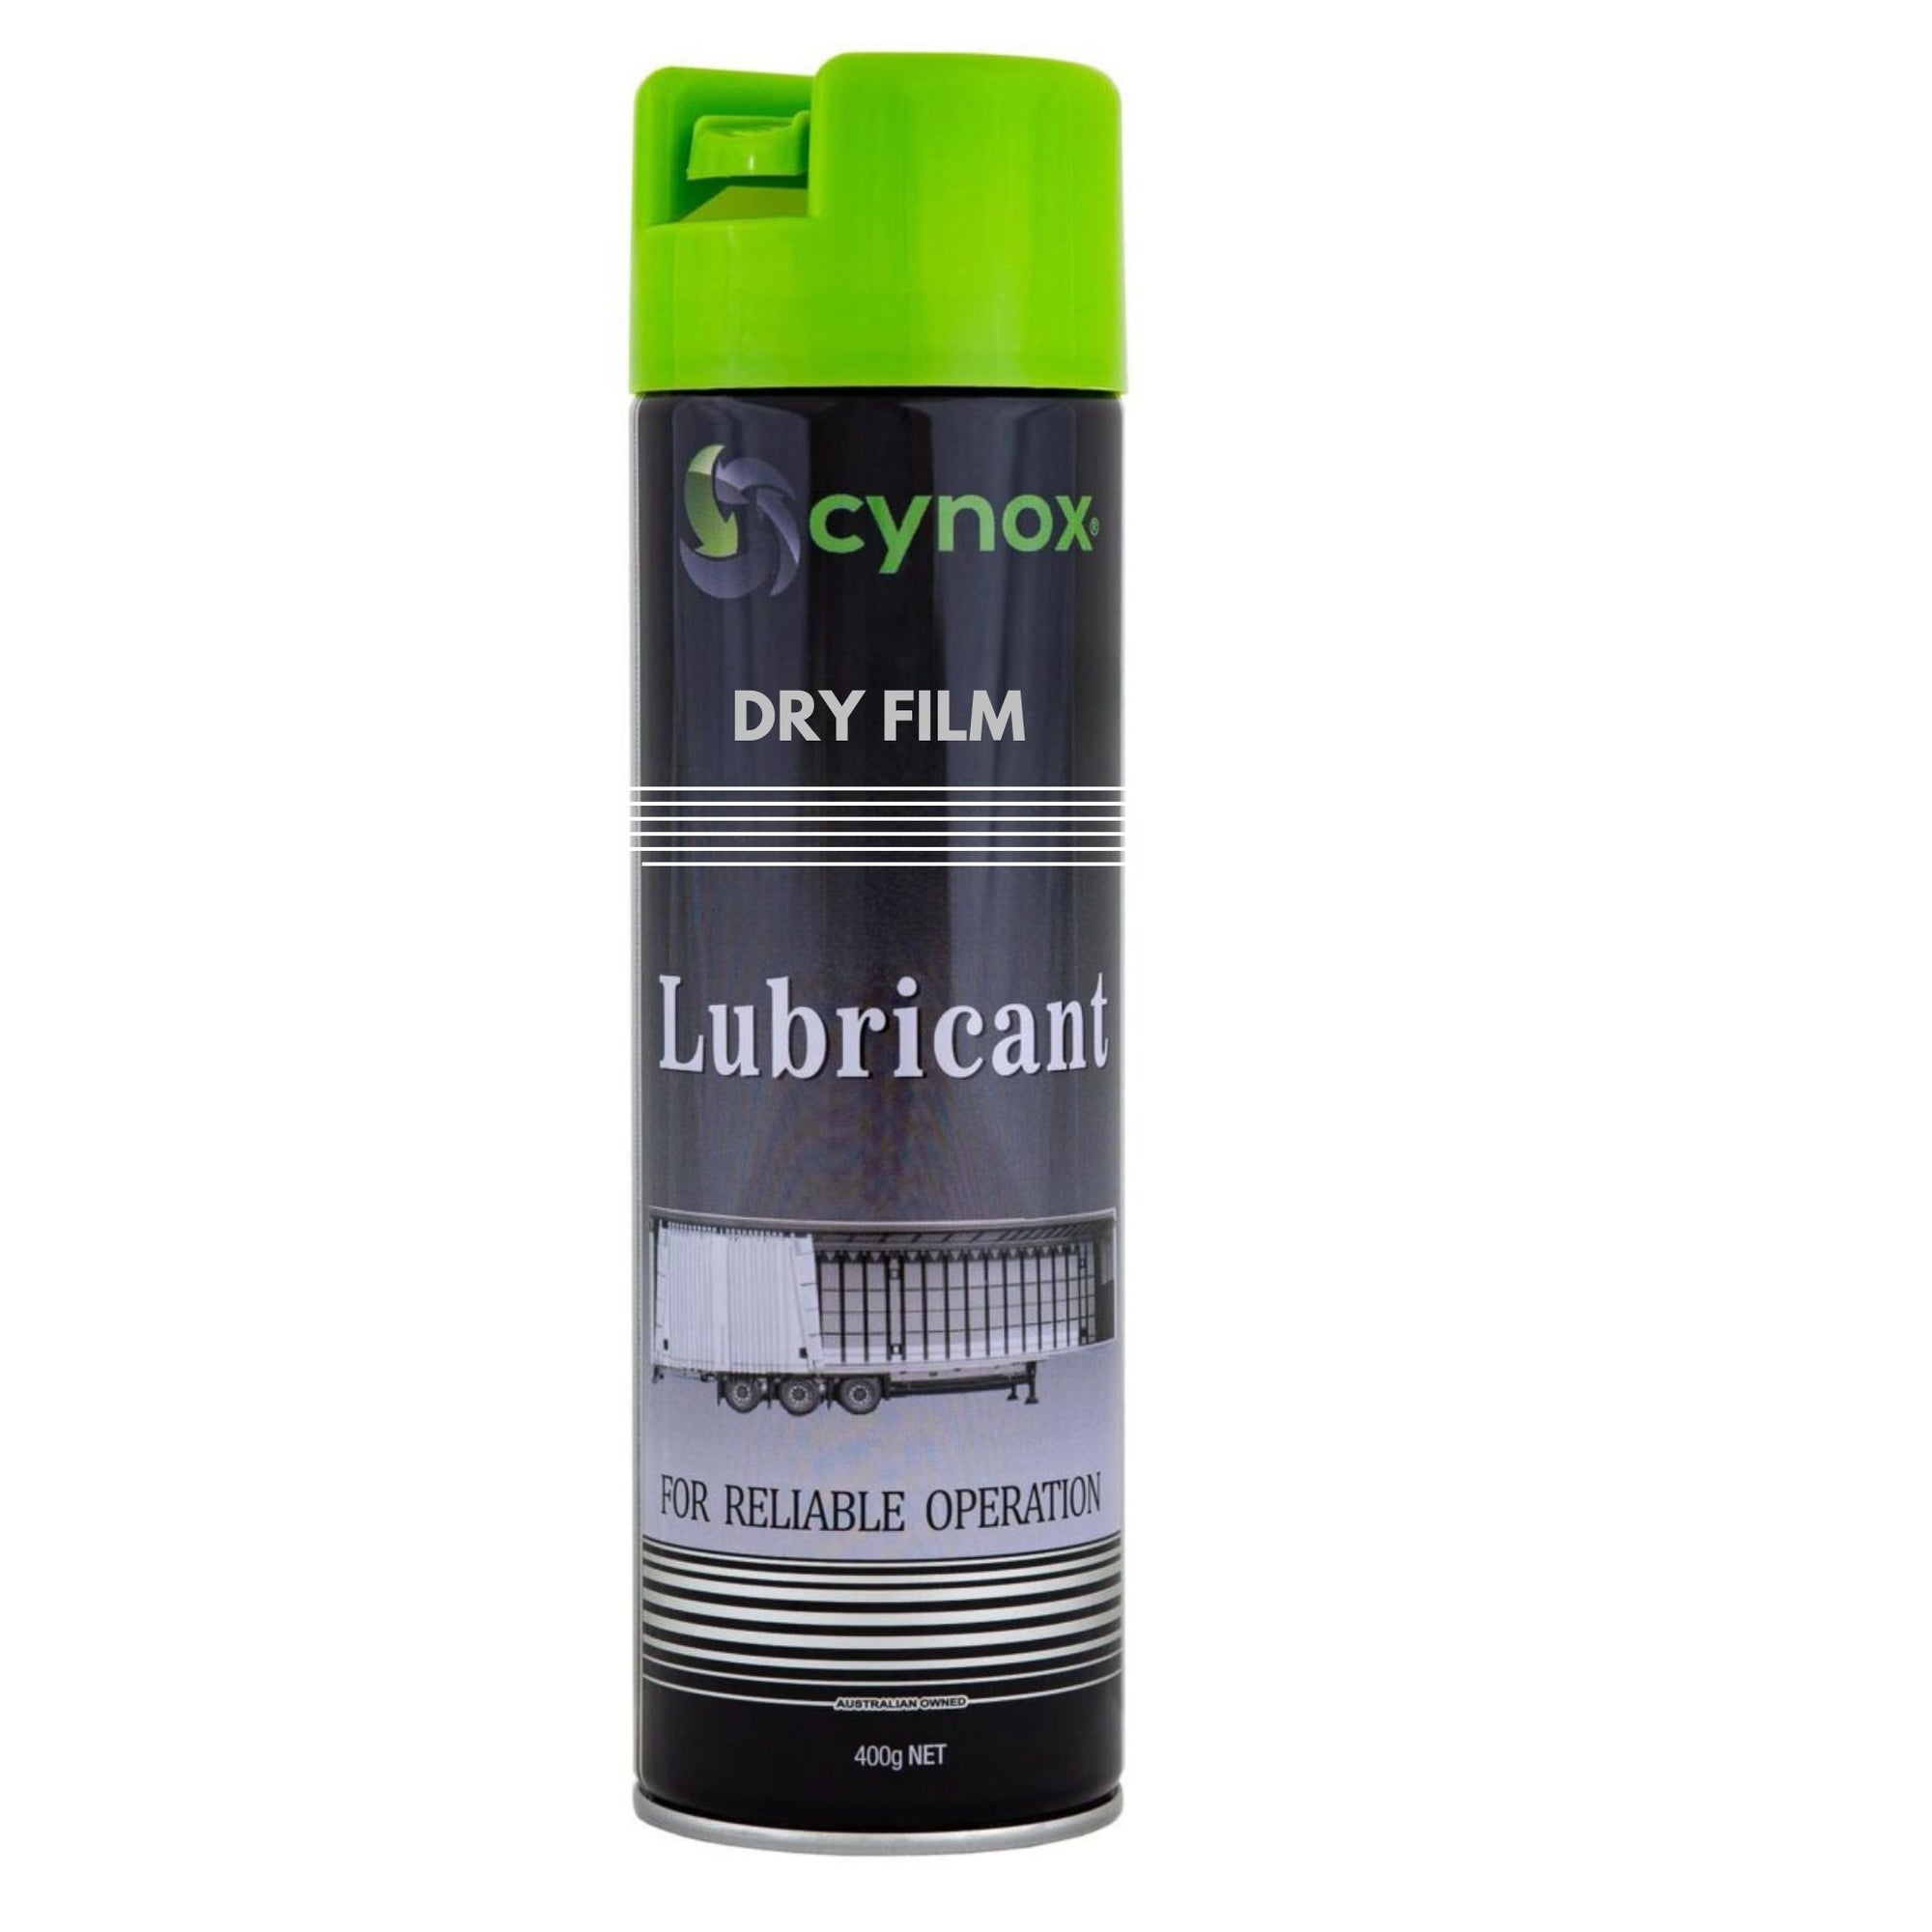 Cynox Dry Film Lubricant - South East Clearance Centre